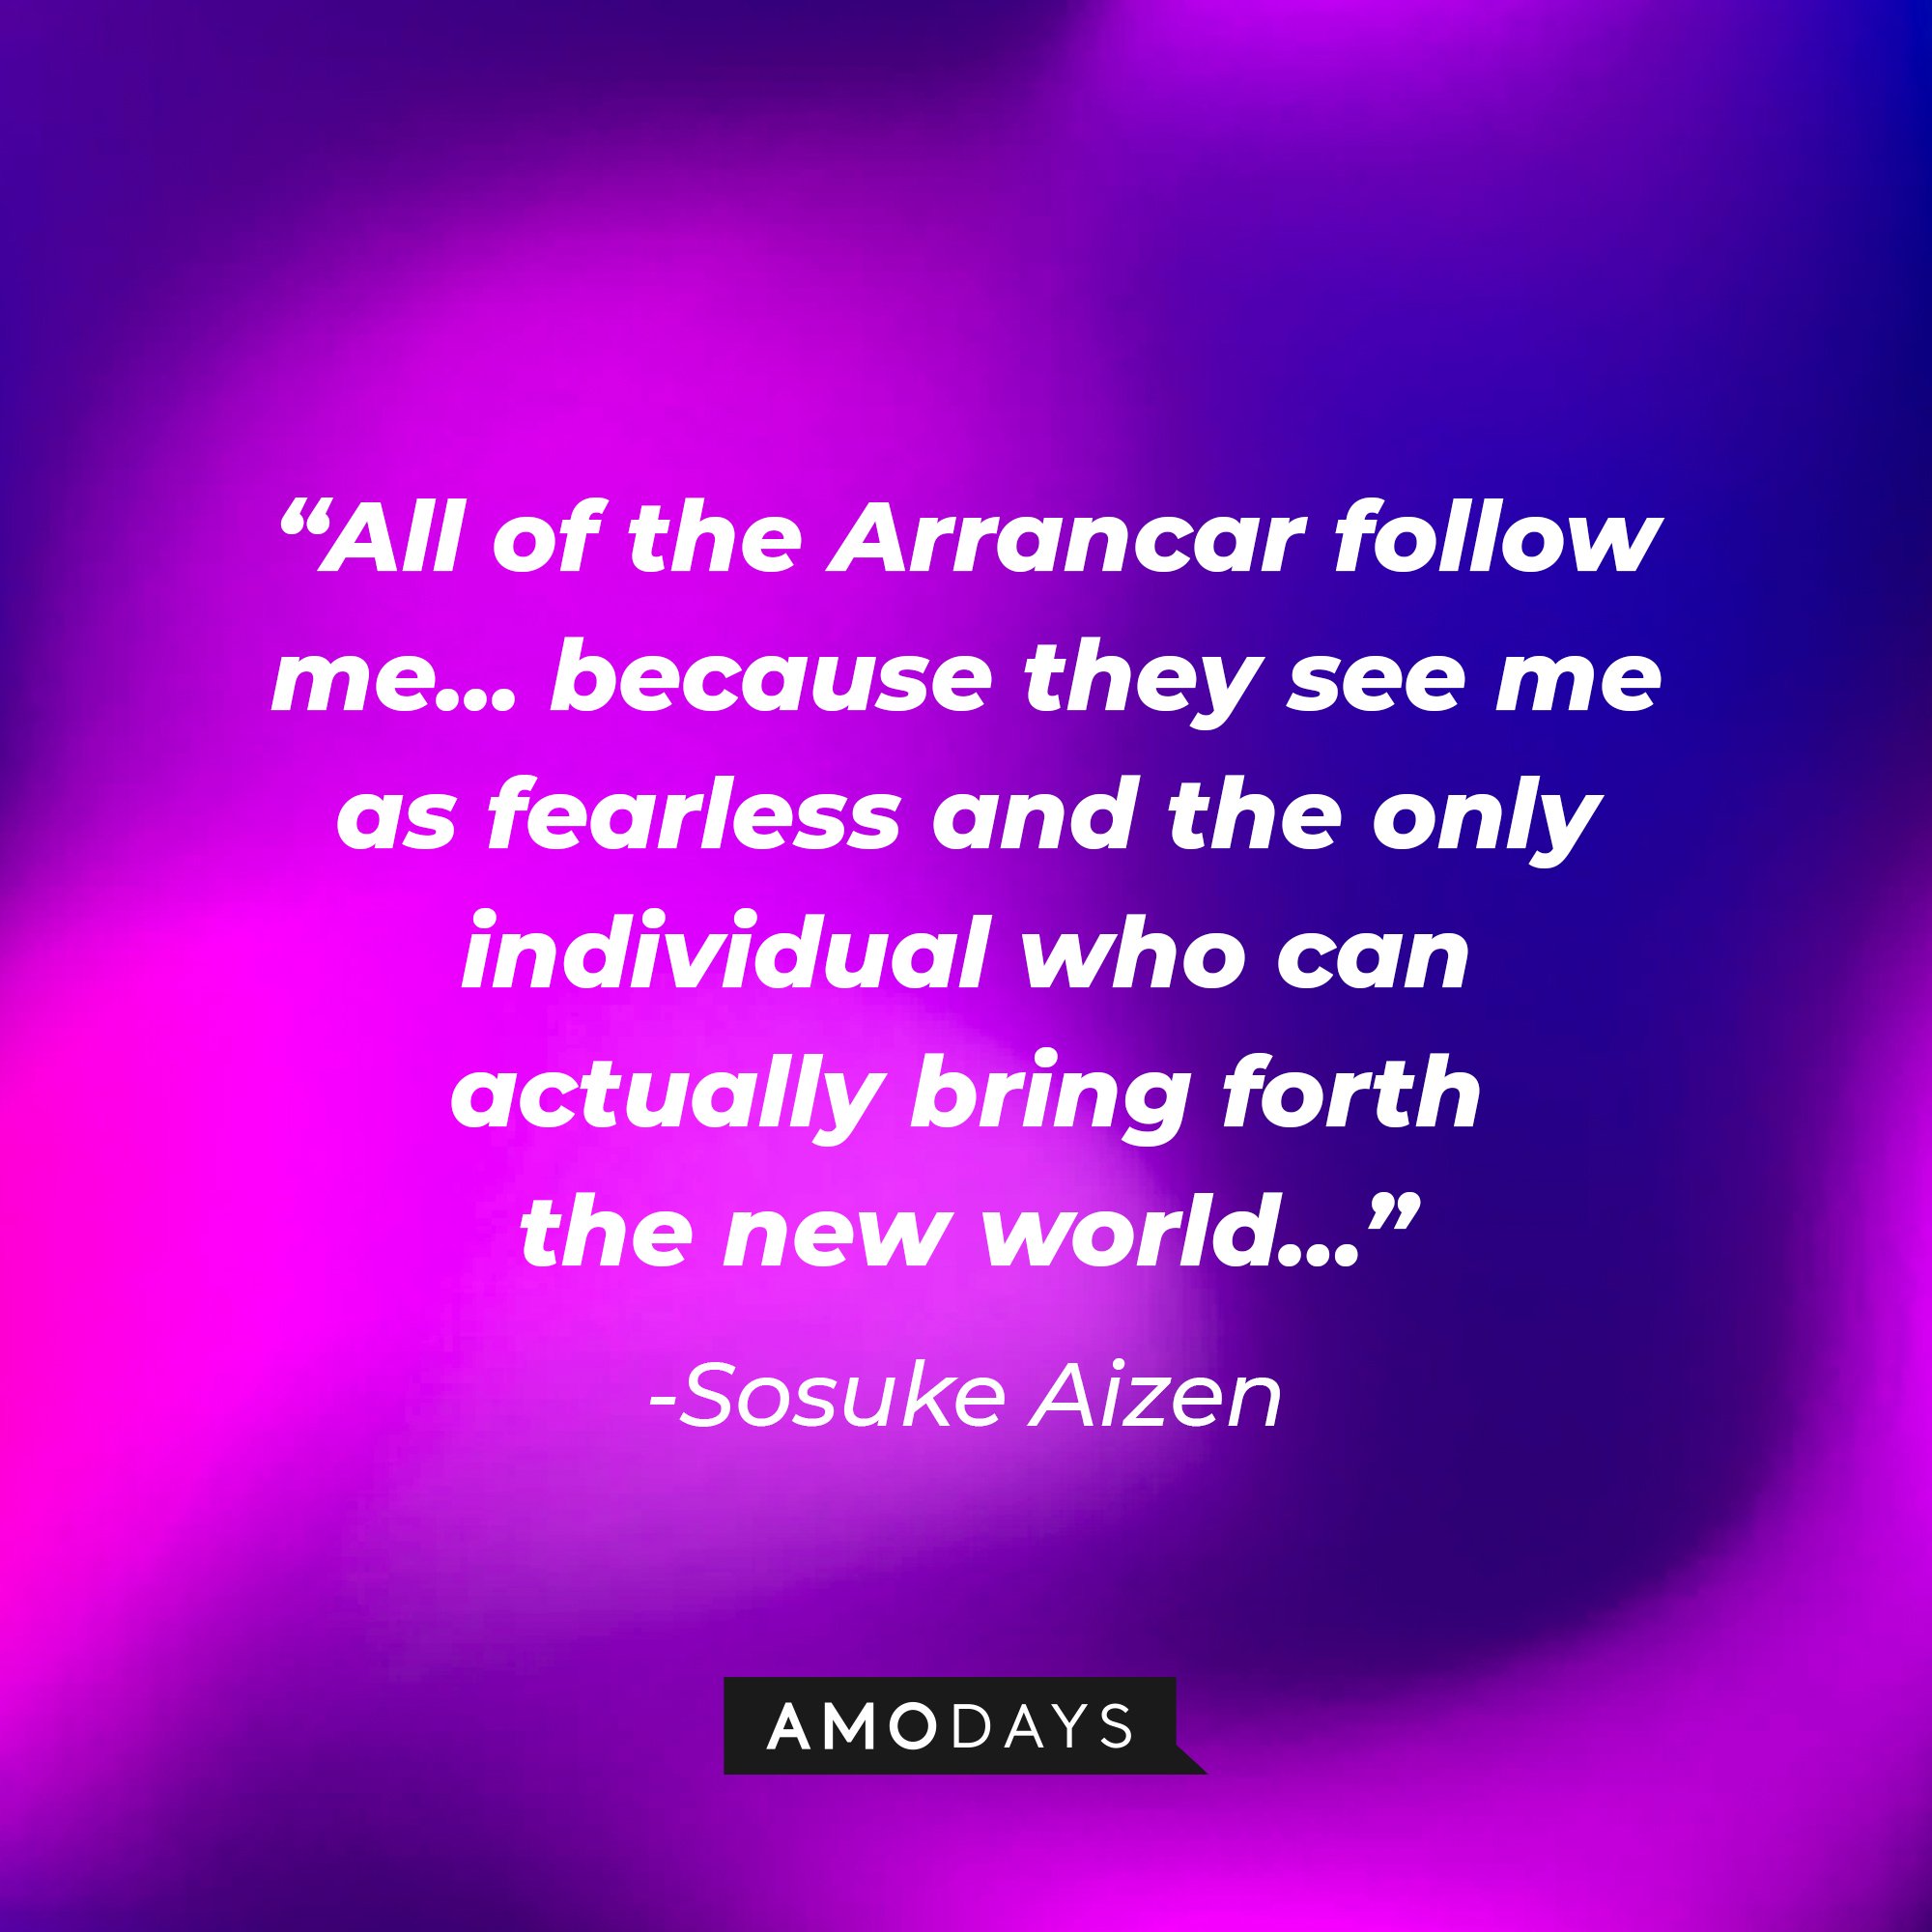 Sosuke Aizen's quote: "All of the Arrancar follow me... because they see me as fearless and the only individual who can actually bring forth the new world…" | Image: AmoDays